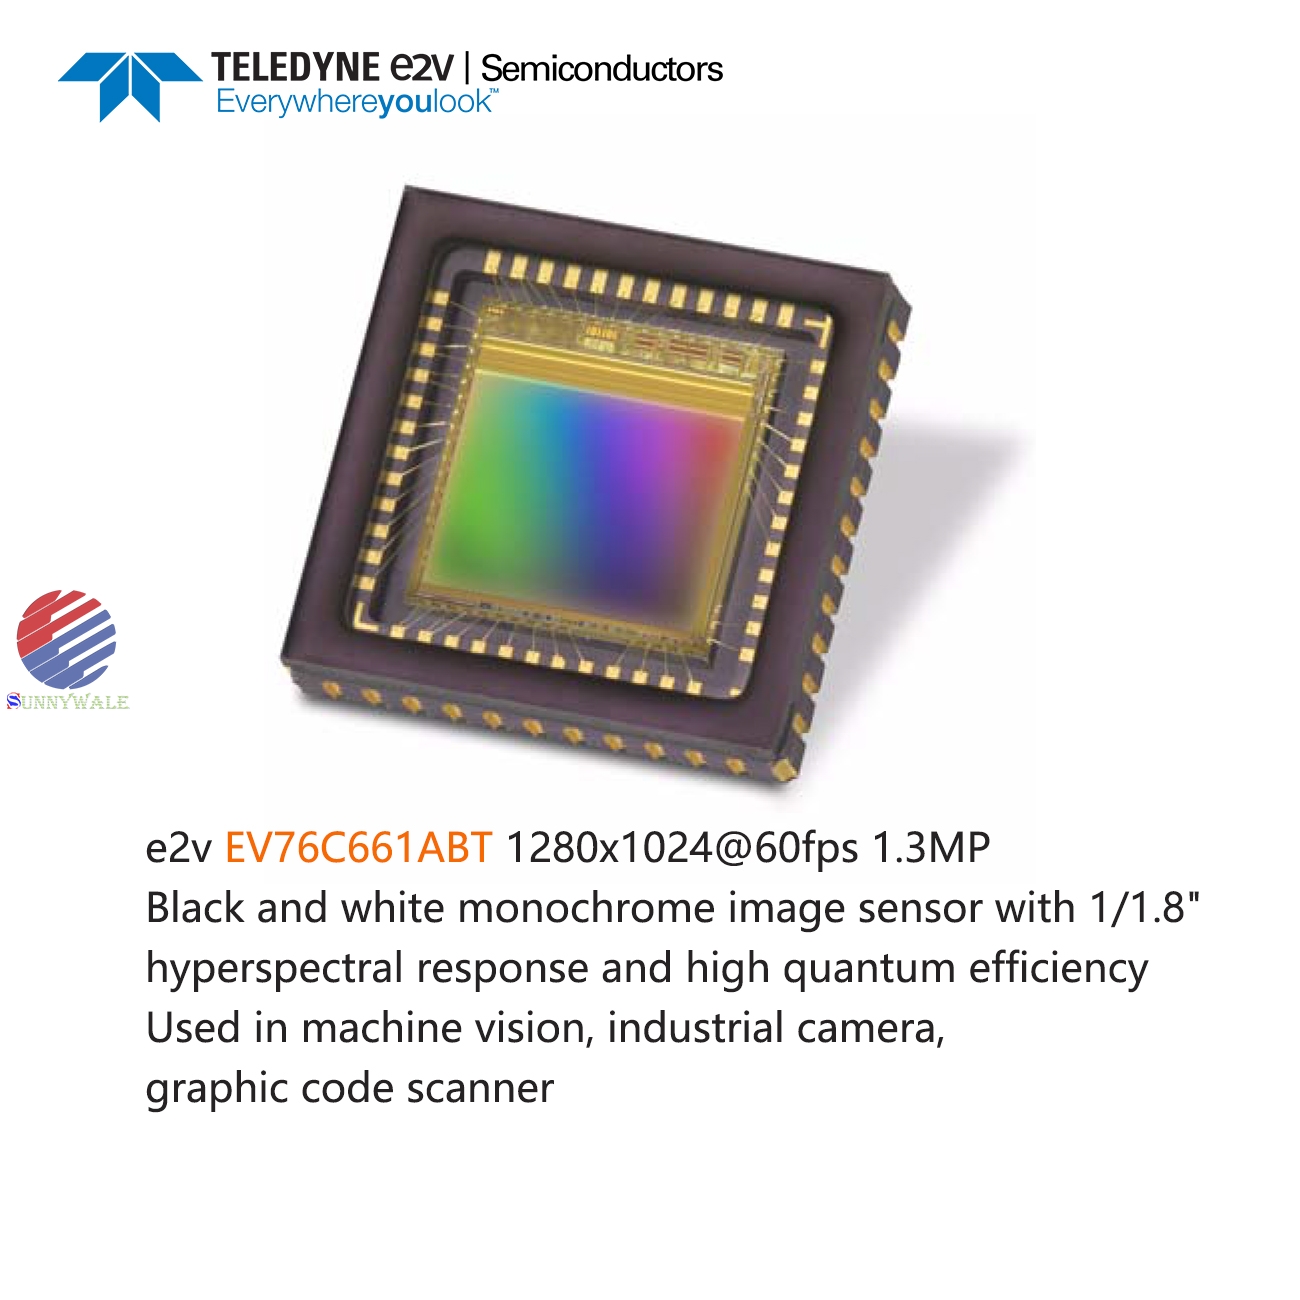 EV76C661ABT, e2v image sensor, 1280x1024 1.3megapixel, 1.3MP photosensitive chip, 1/1.8-inch sensor chip, Industrial camera monochrome cmos, black and white image sensor, hyperspectral response and high quantum efficiency cmos,CMOS SENSOR with ultra high sensitivity is comparable to CCD